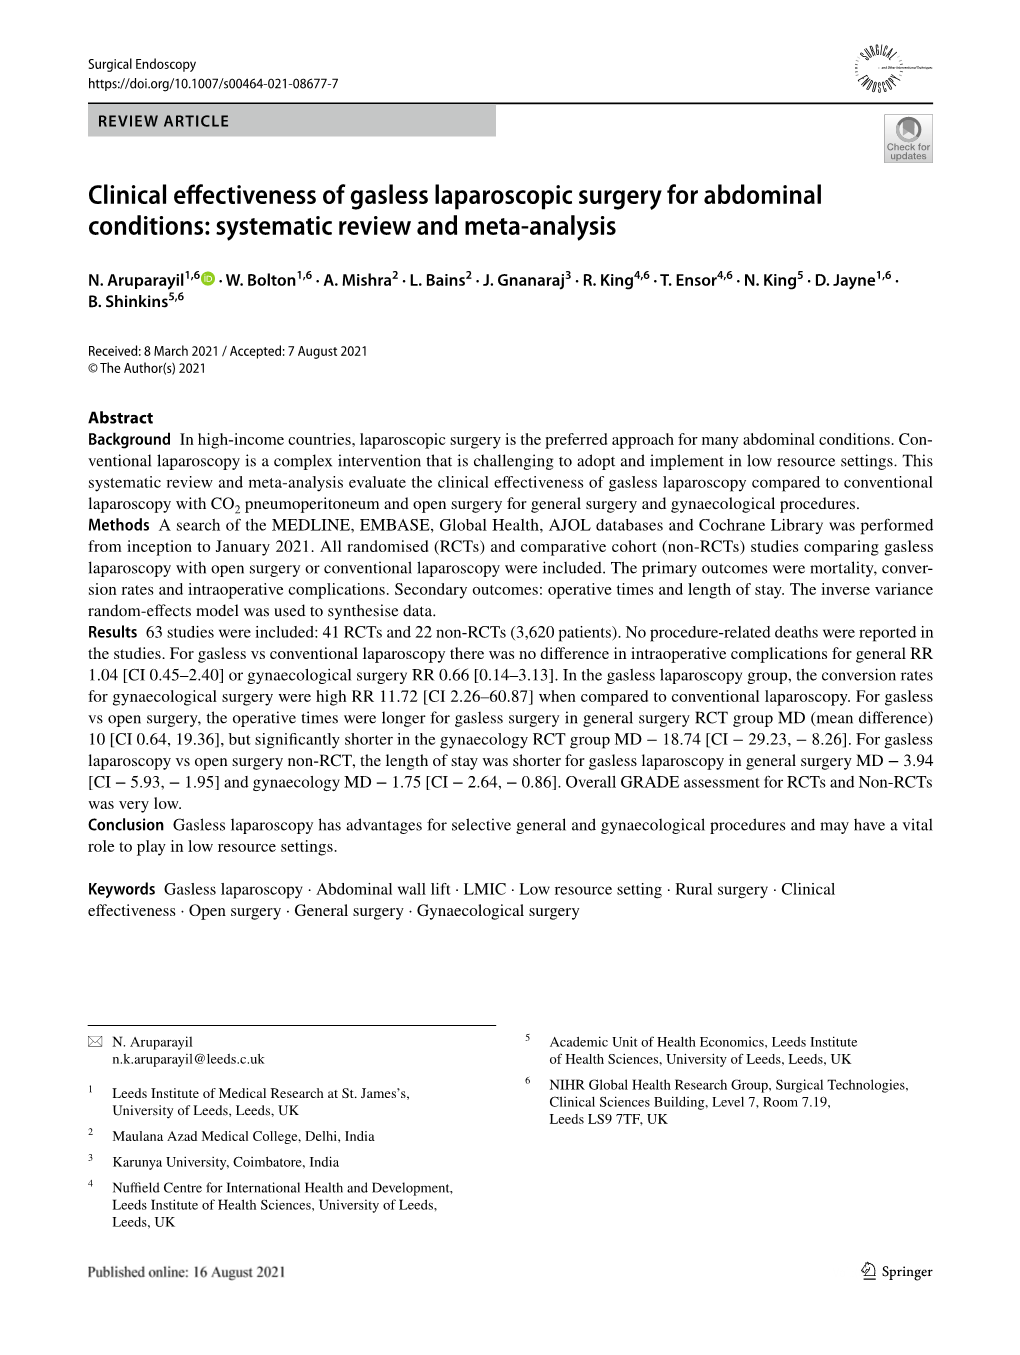 Clinical Effectiveness of Gasless Laparoscopic Surgery for Abdominal Conditions: Systematic Review and Meta-Analysis